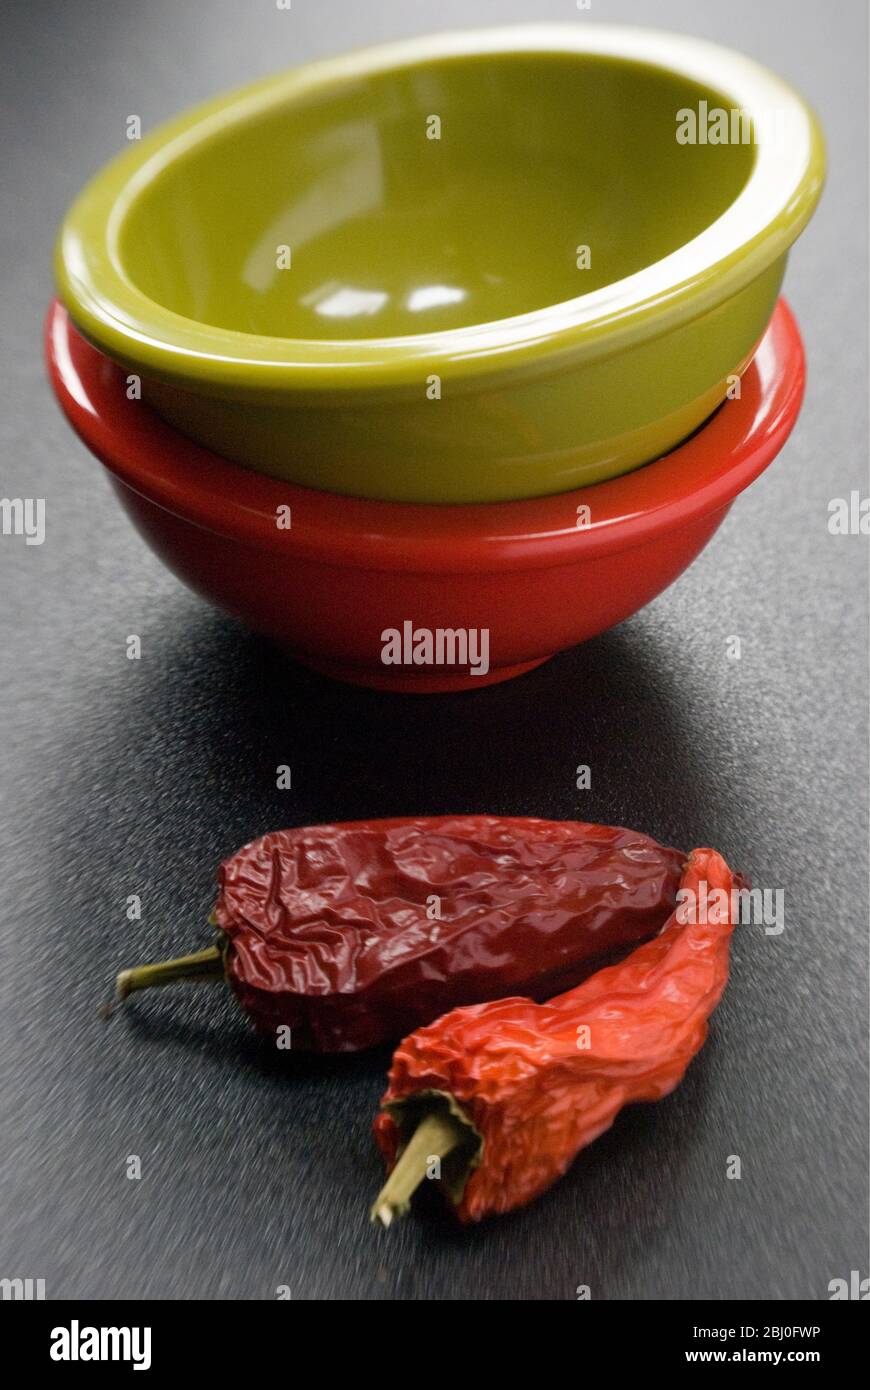 Two bright melamine bowls stacked on dark surface with two red hot chilli peppers - Stock Photo